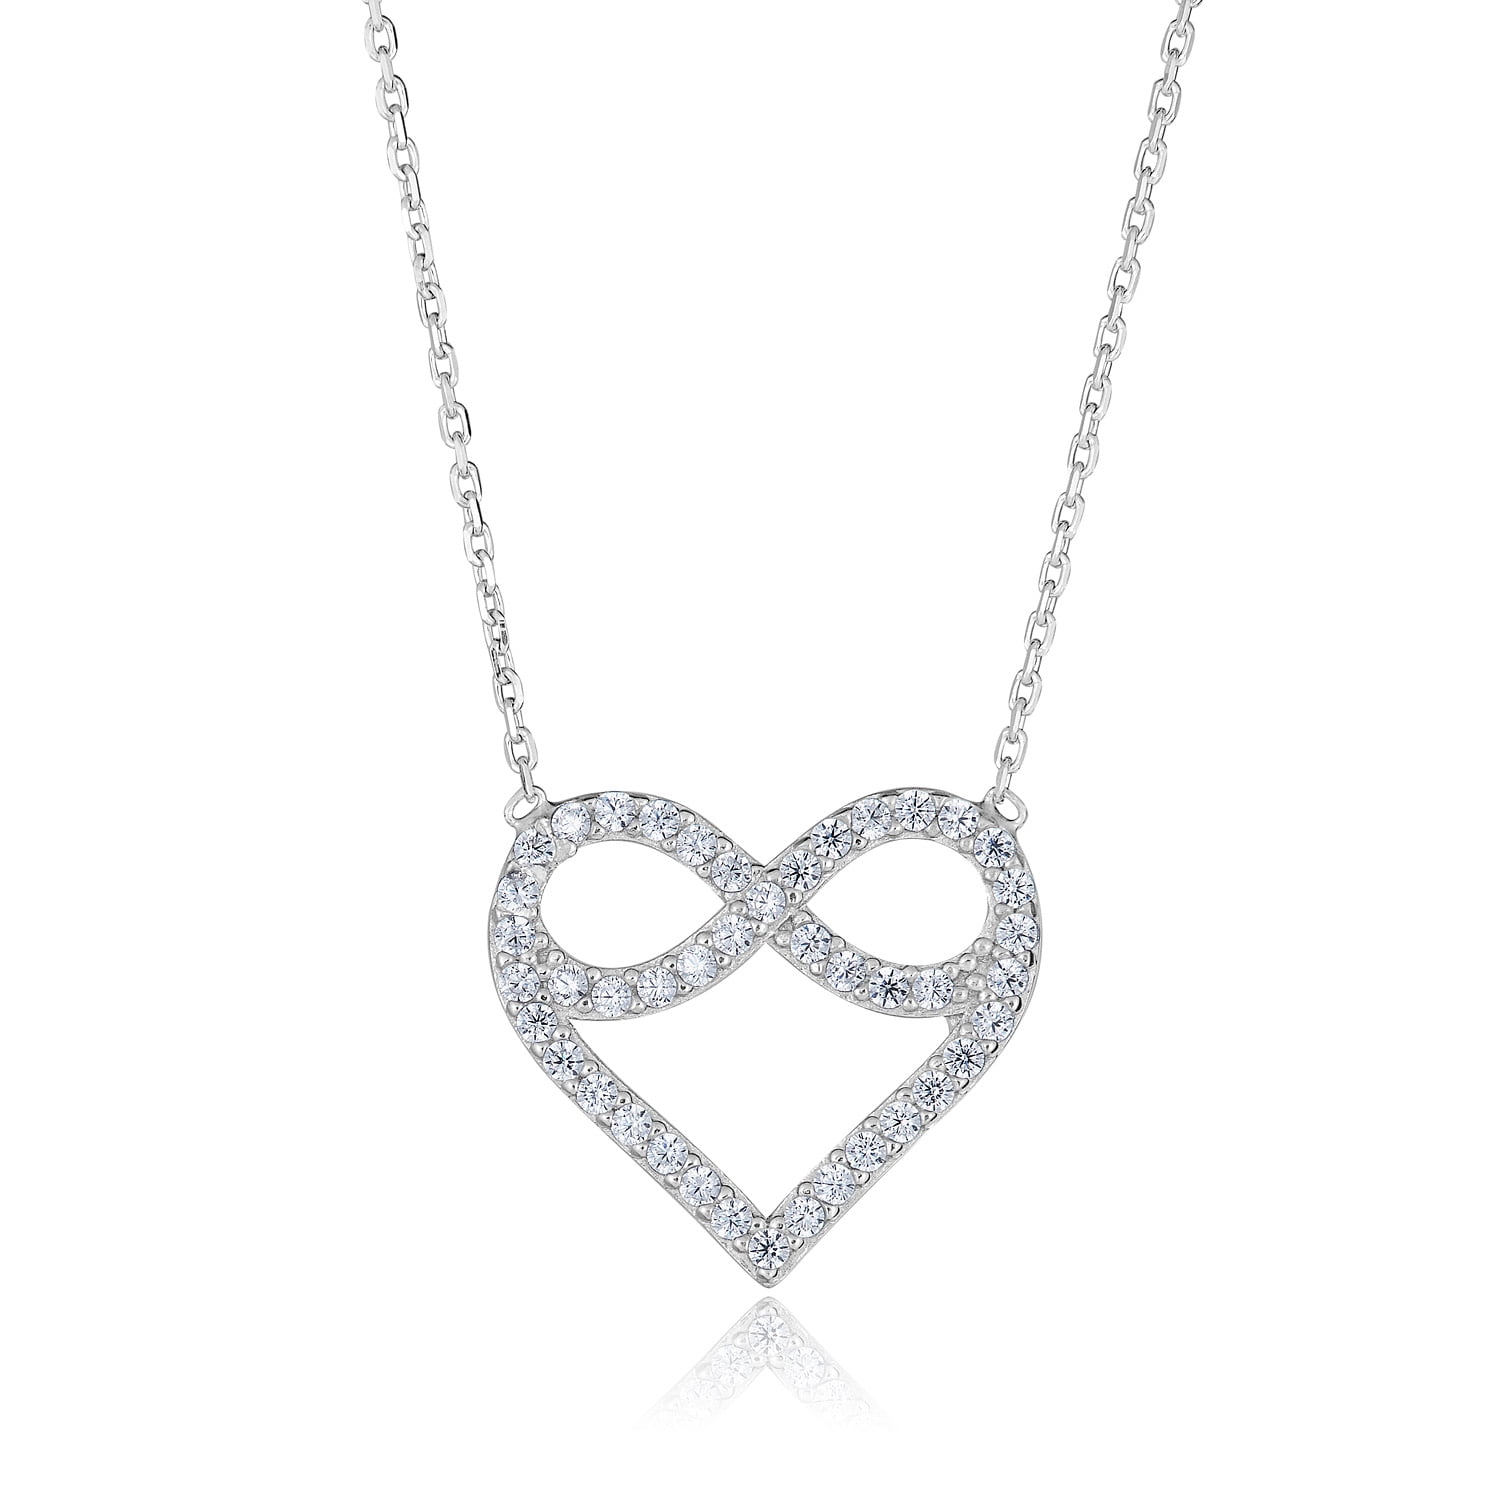 925 Sterling Silver Simulated Diamond CZ Infinity Pendant Necklace with 18 Chain